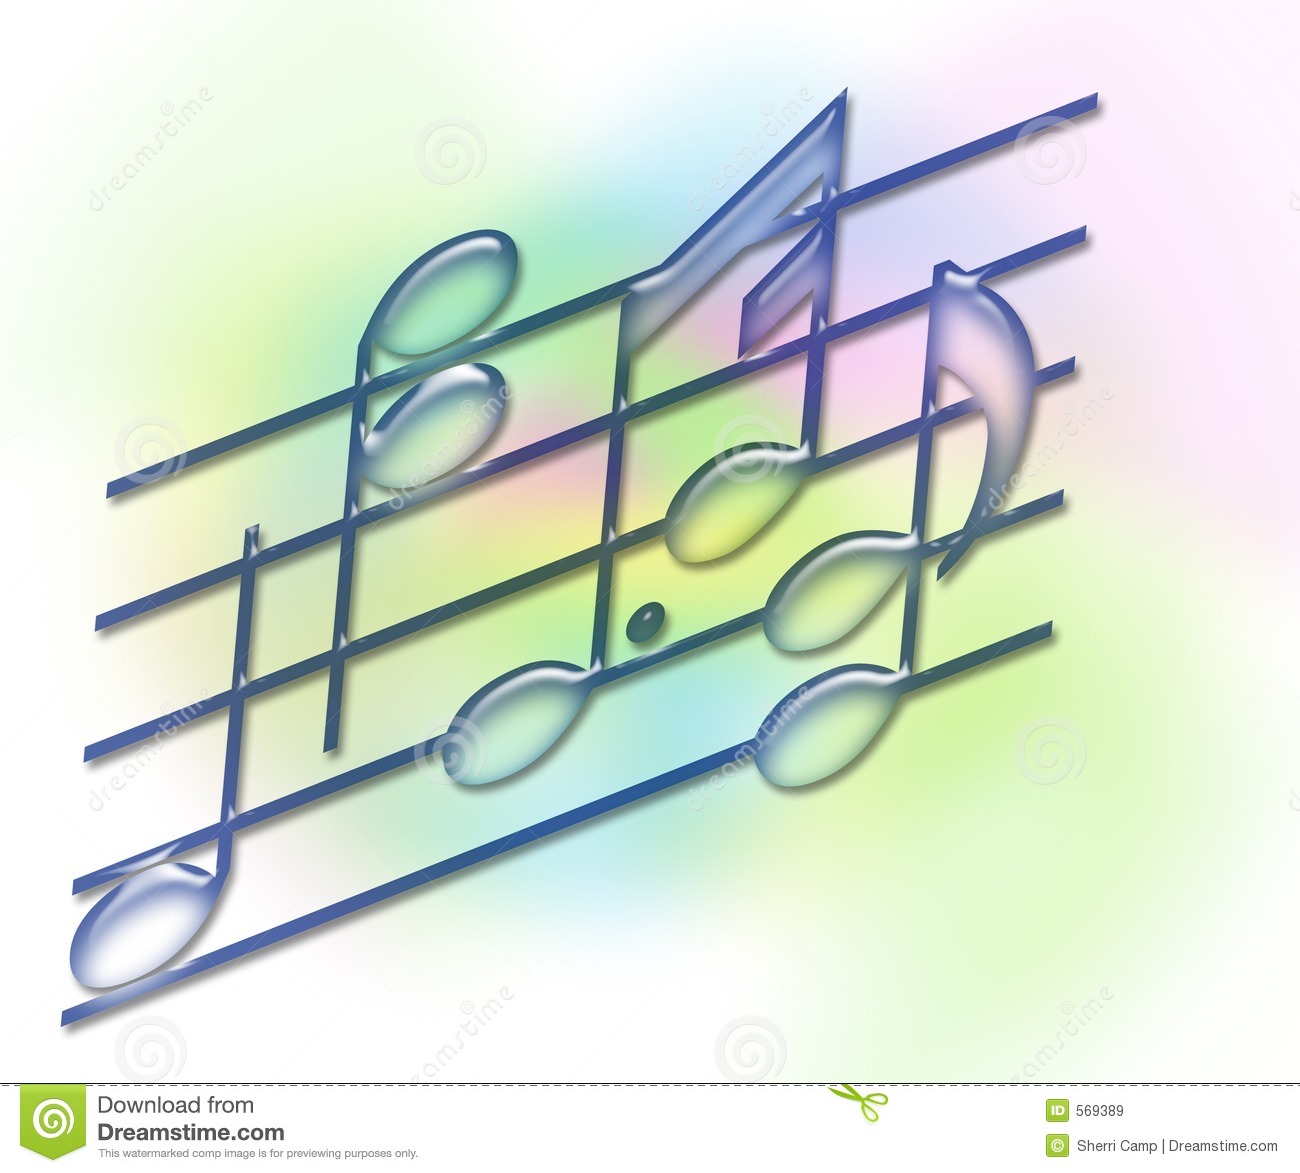 Music Bars   Notes   Soft Pastel Royalty Free Stock Images   Image